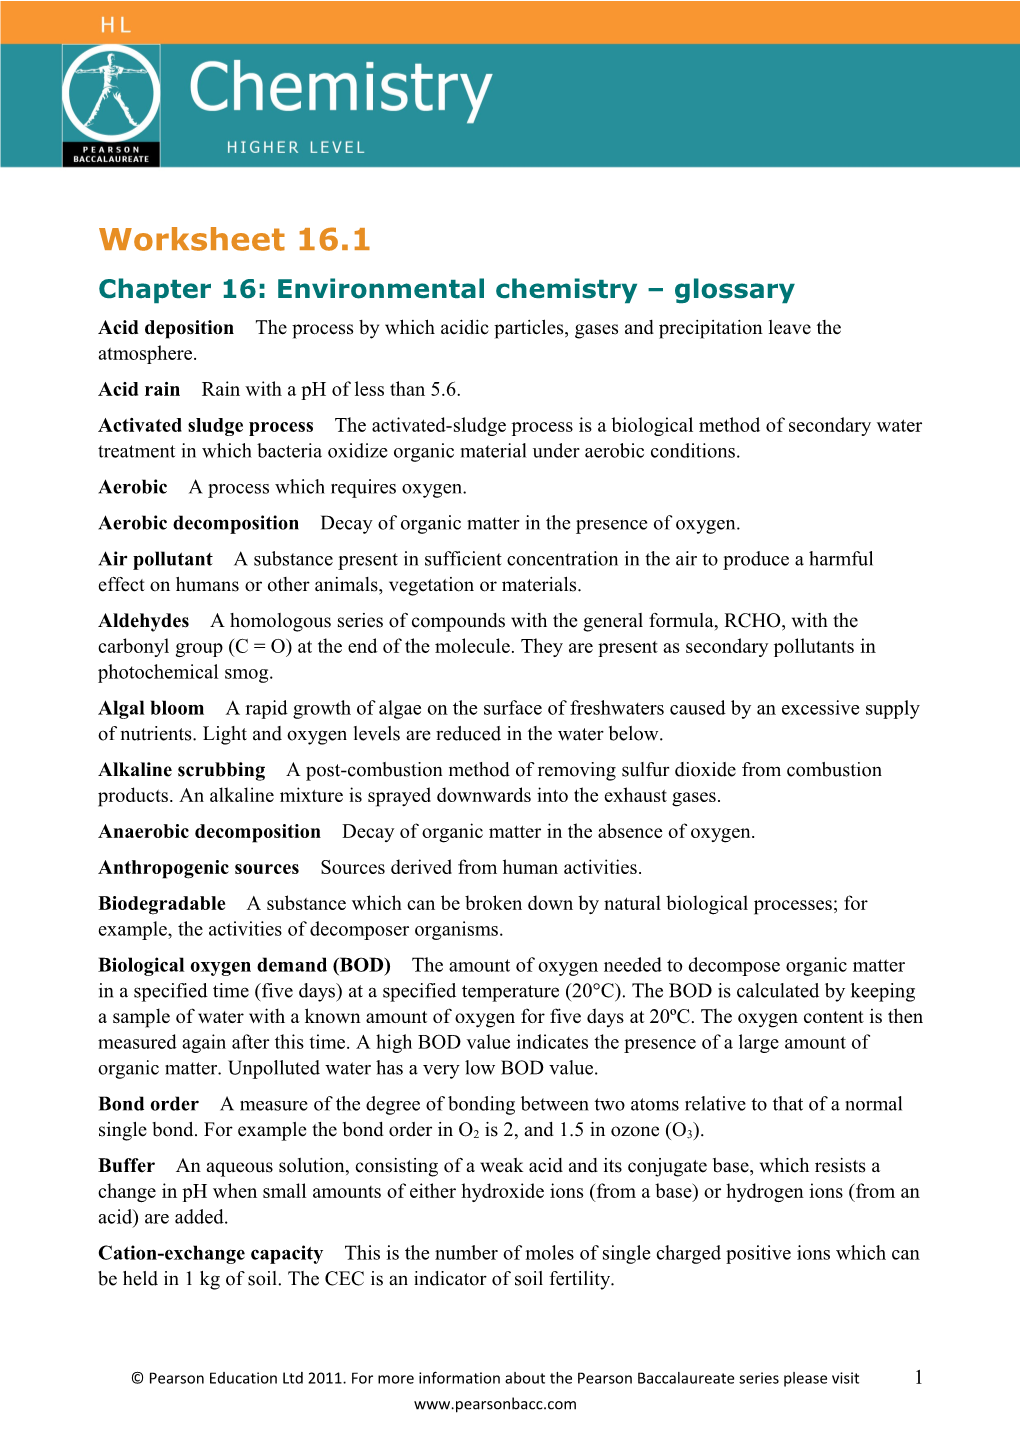 Chapter 16: Environmental Chemistry Glossary